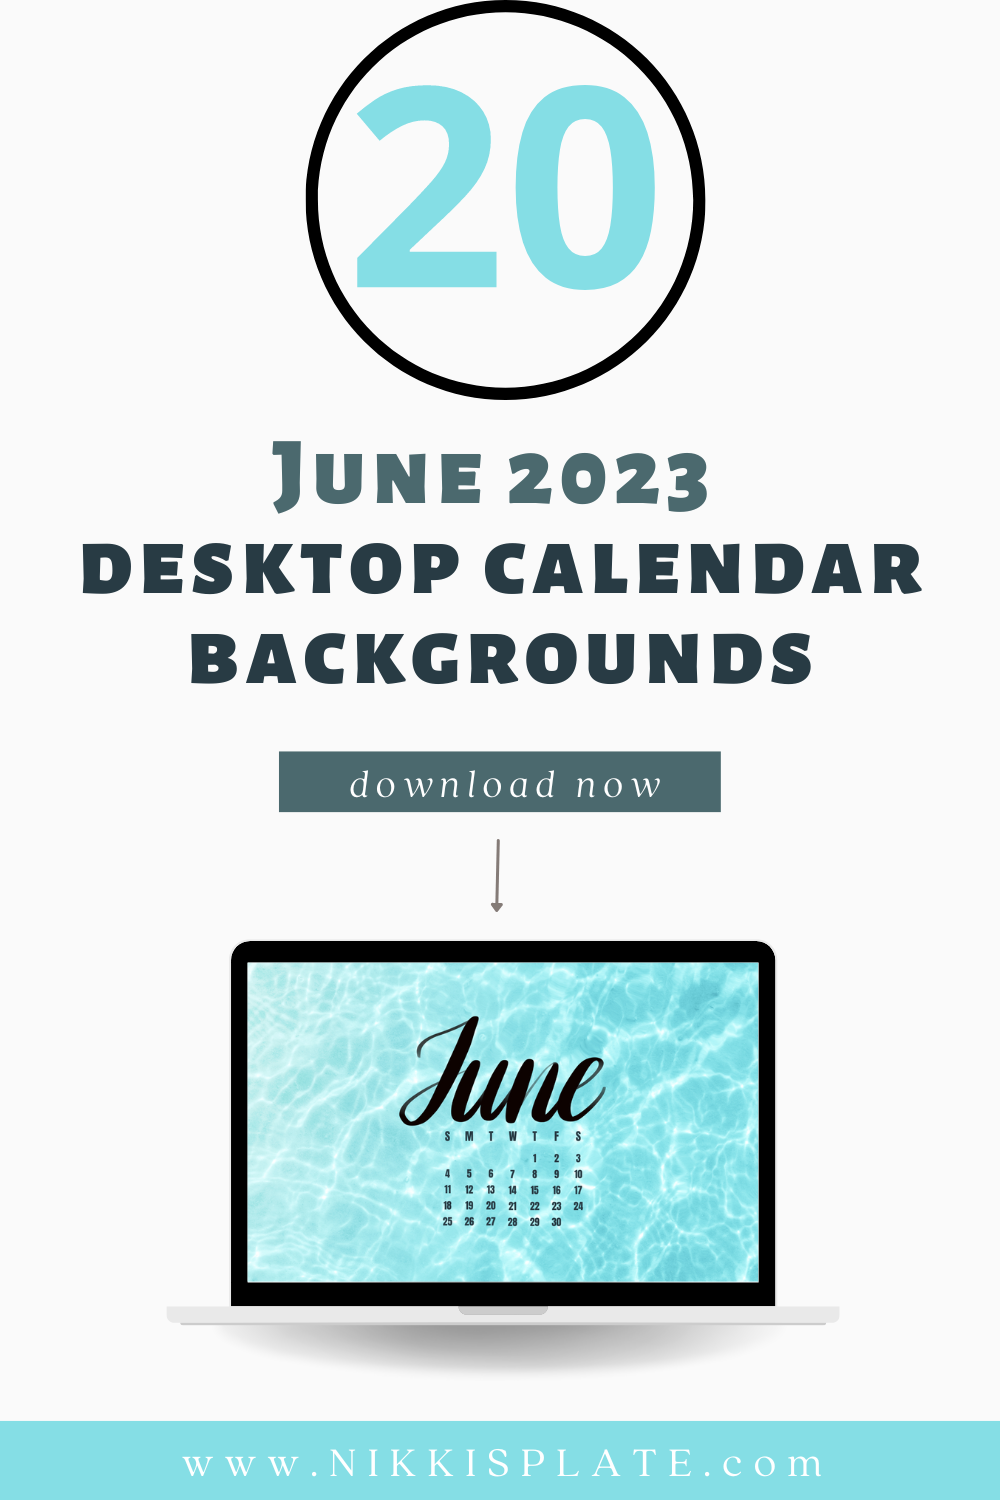 JUNE 2023 desktop calendar backgrounds; Here are your free June backgrounds for computers and laptops. Tech freebies for this month!